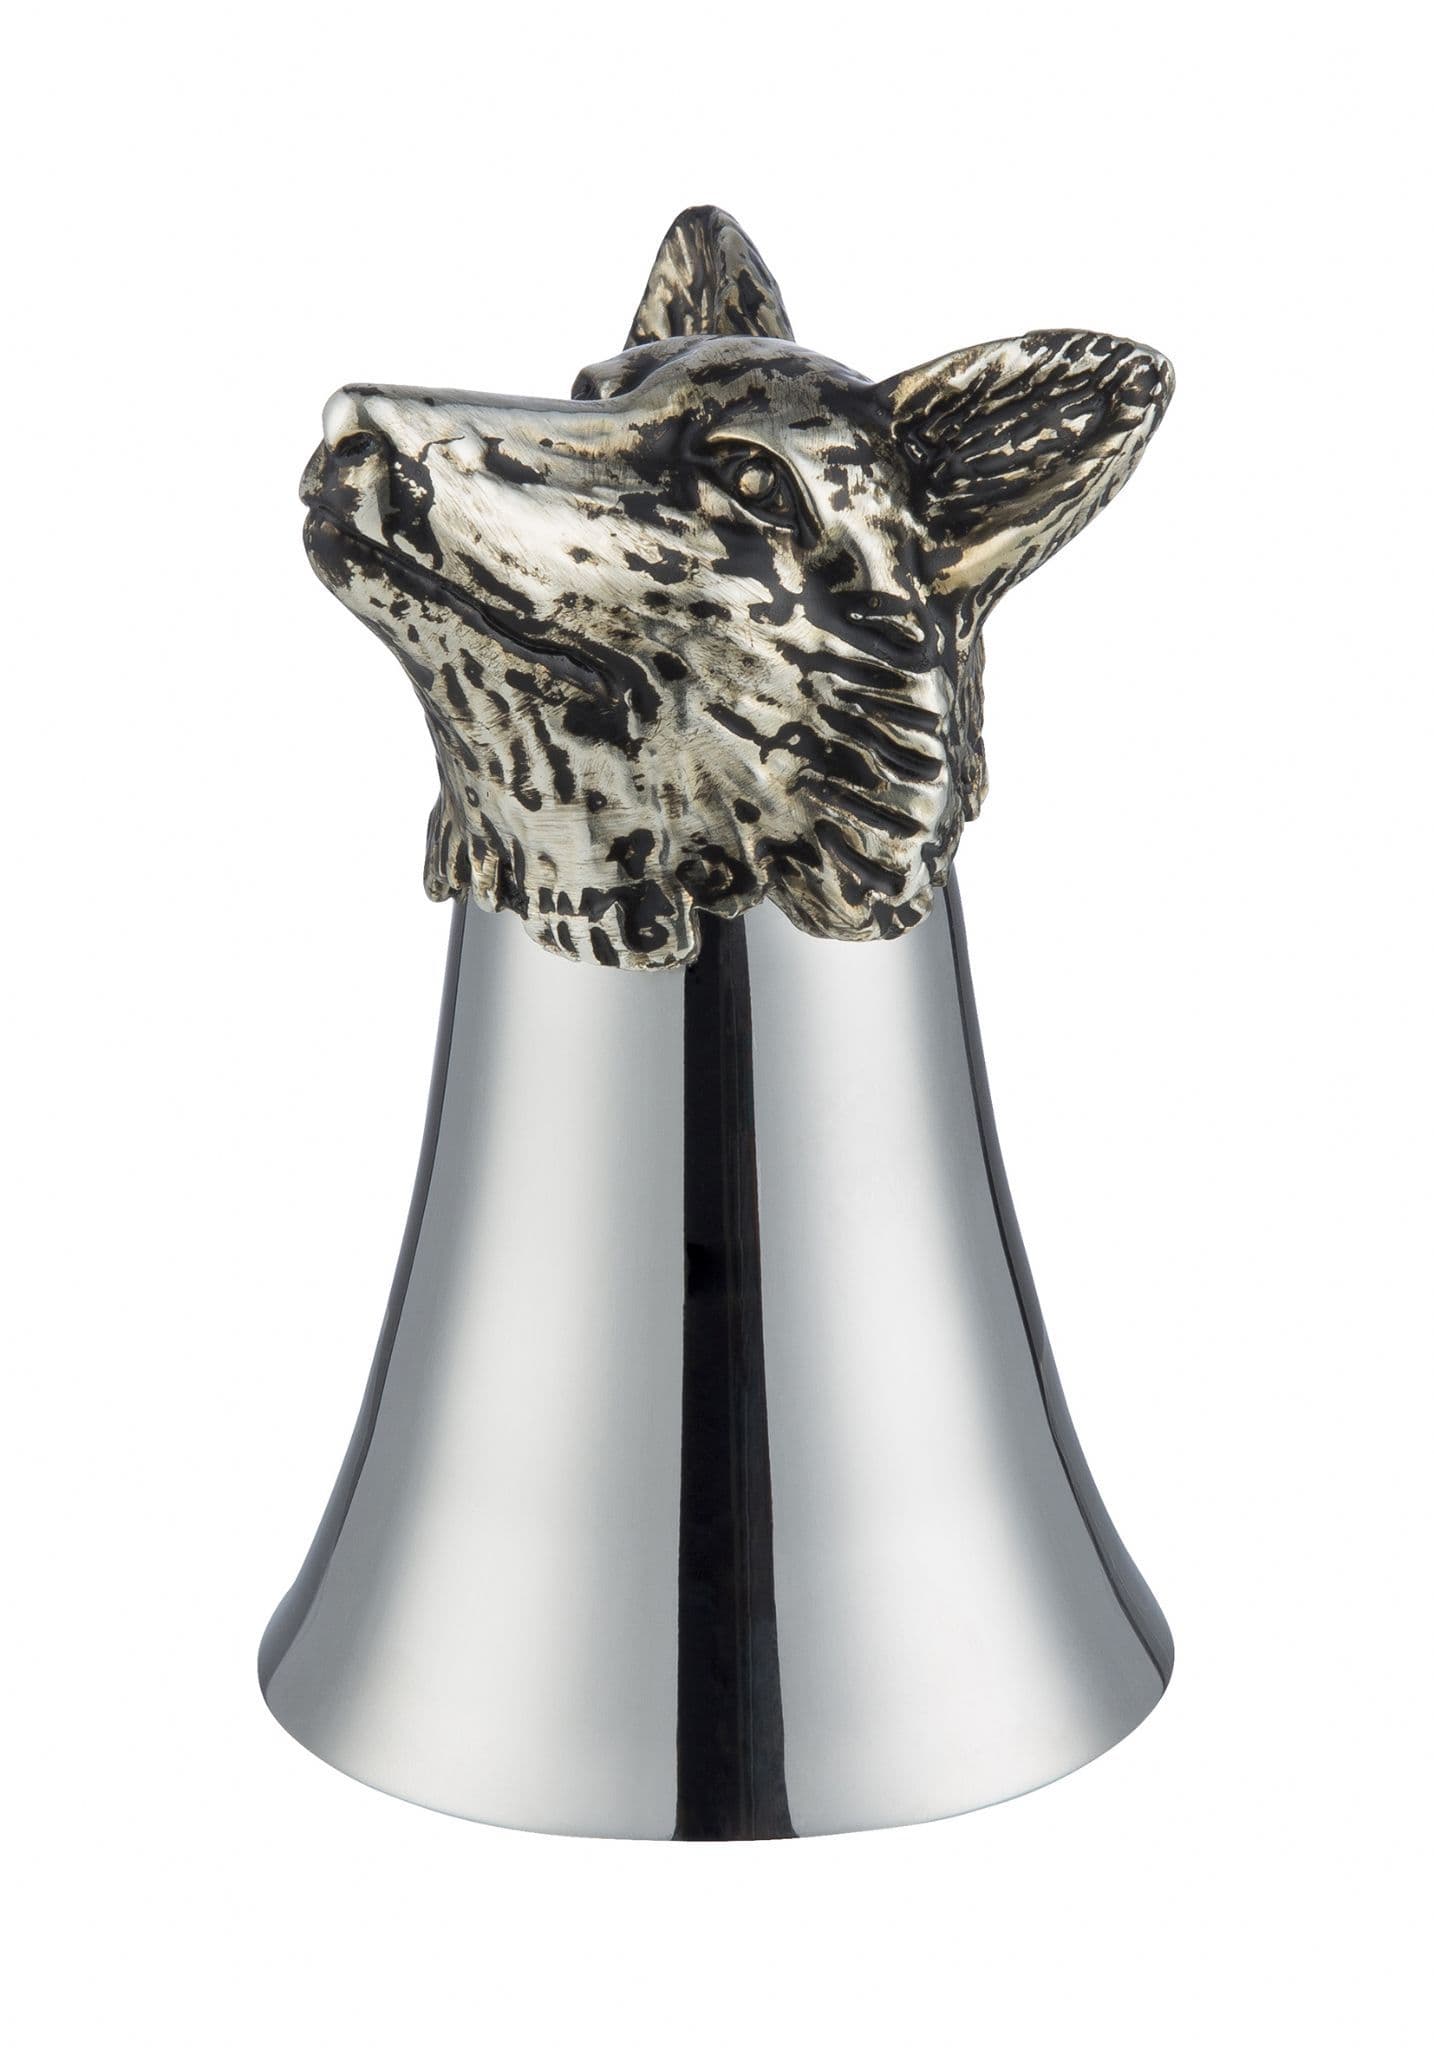 FOX HEAD POLISHED STAINLESS STEEL STIRRUP CUP